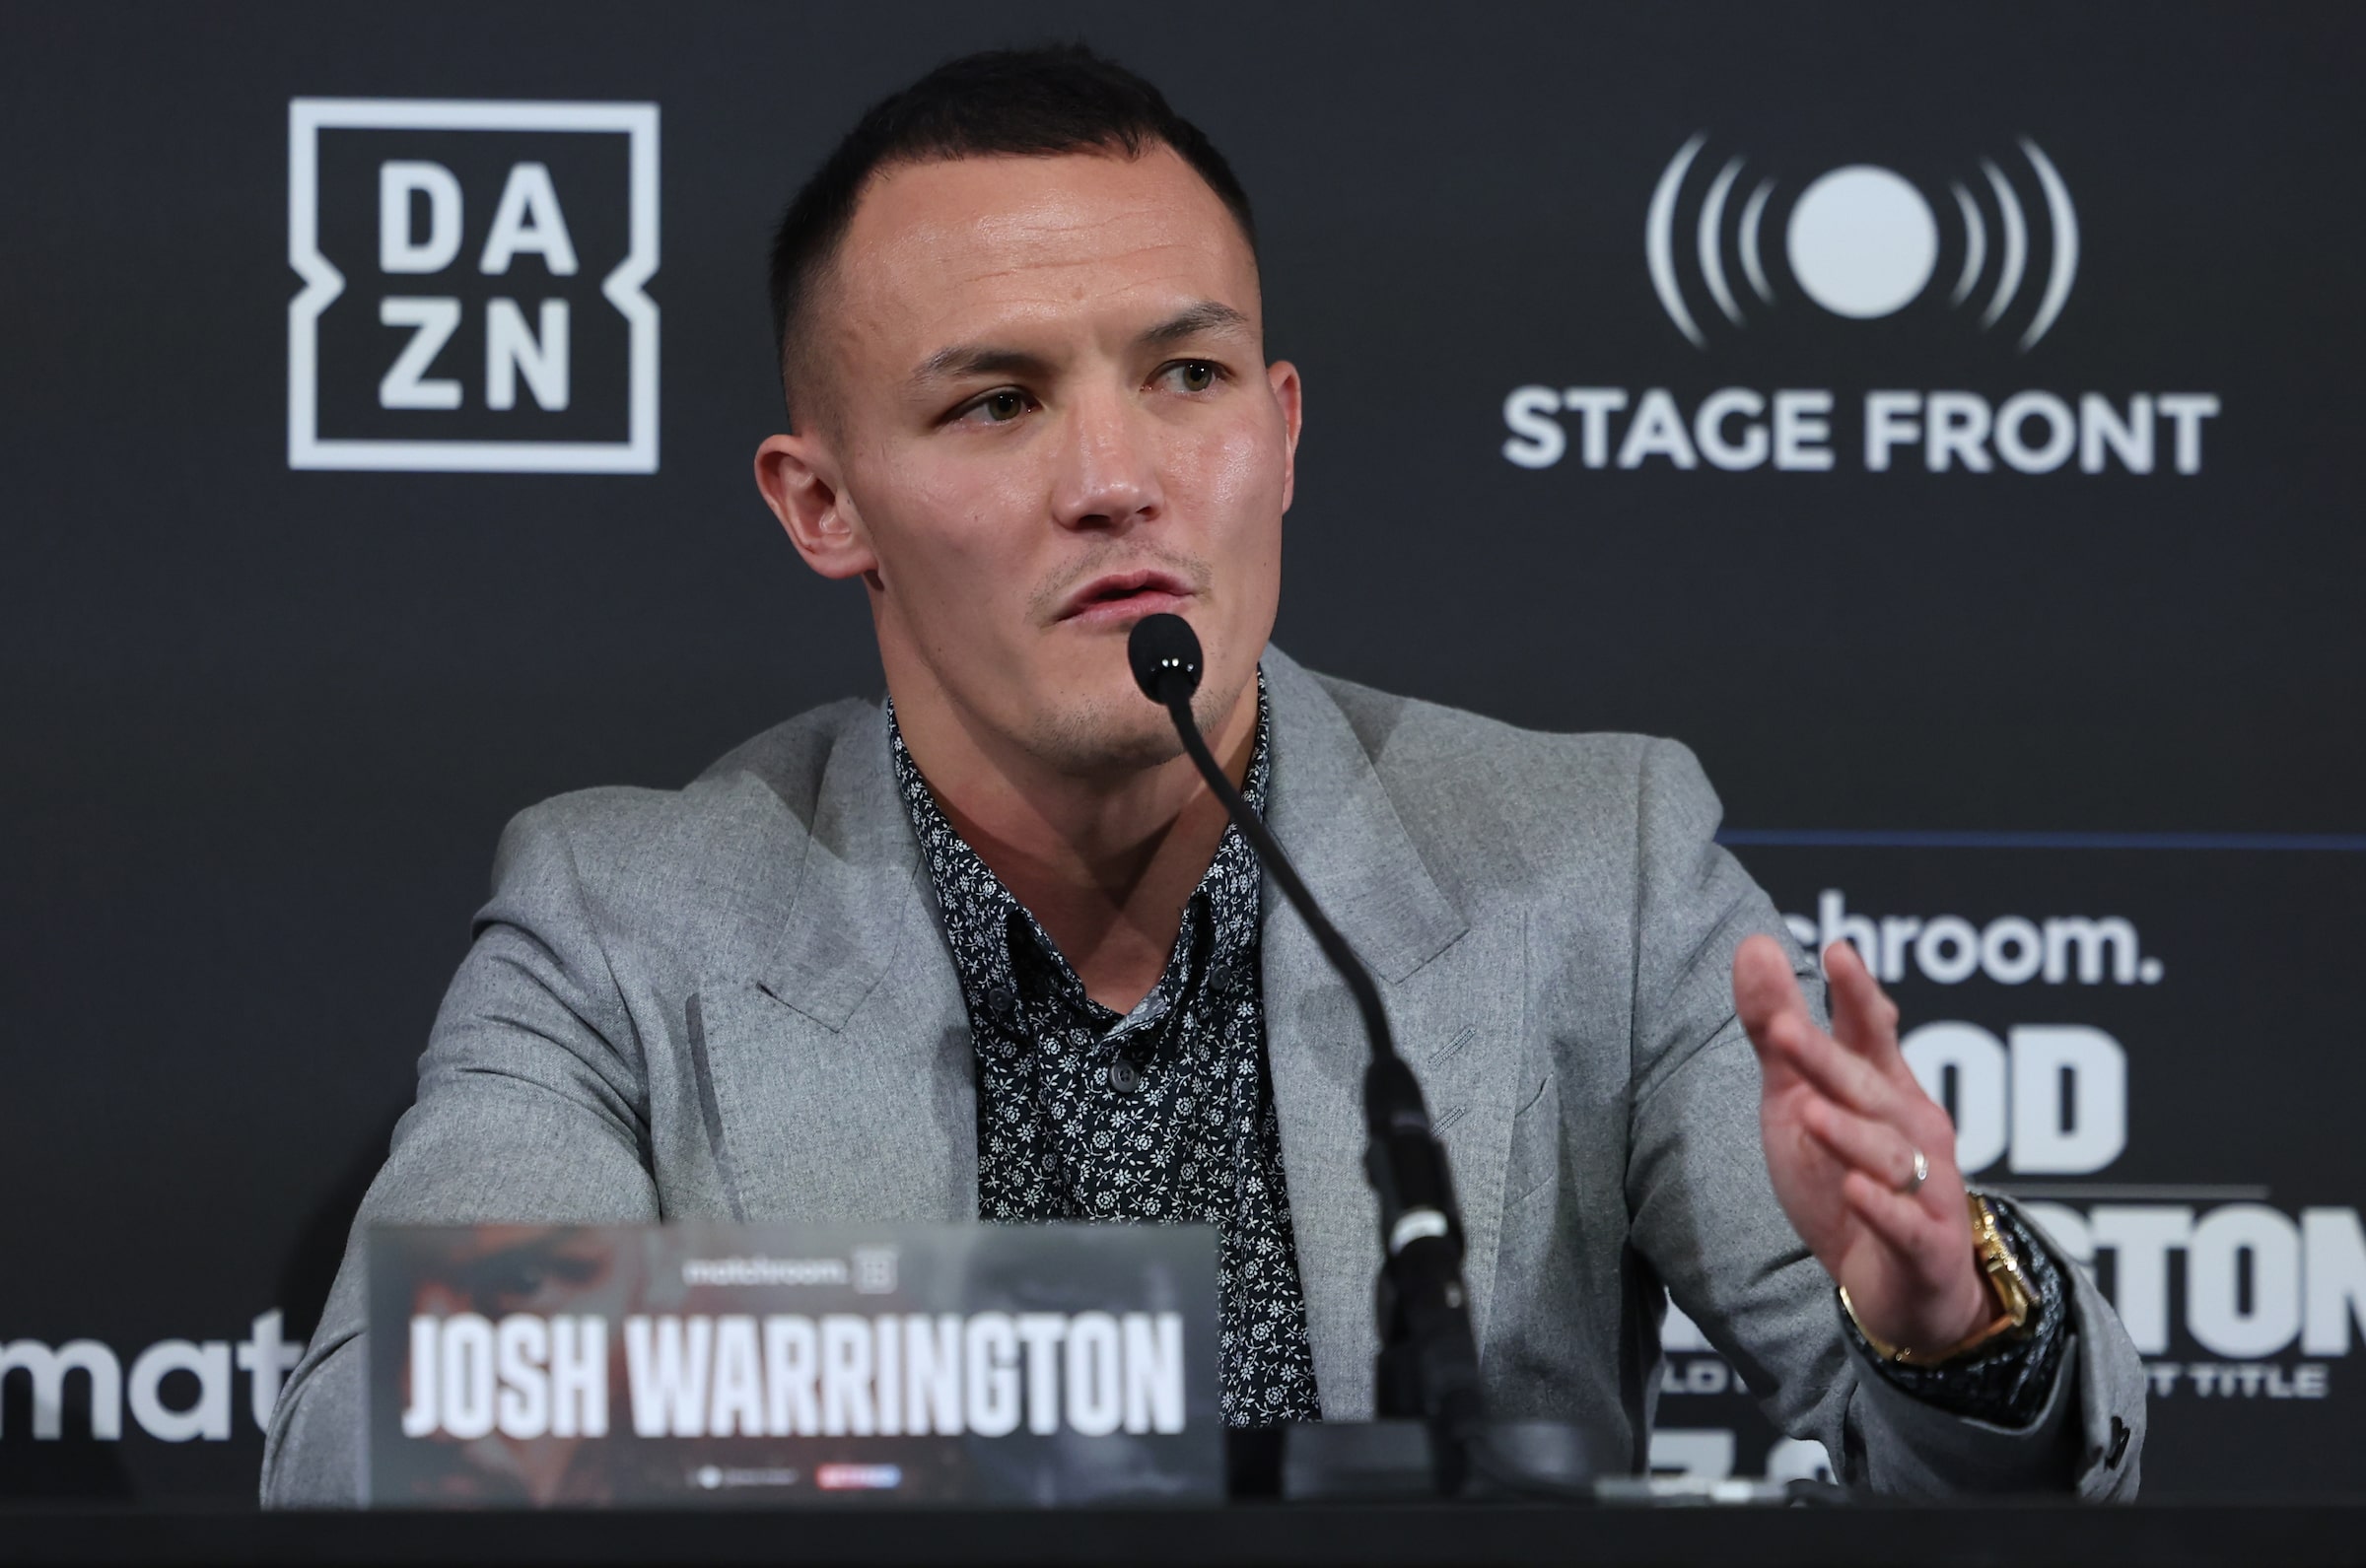 Warrington draws on Frampton experience ahead of Wood encounter while insisting any Cordina fight has to be right financially 